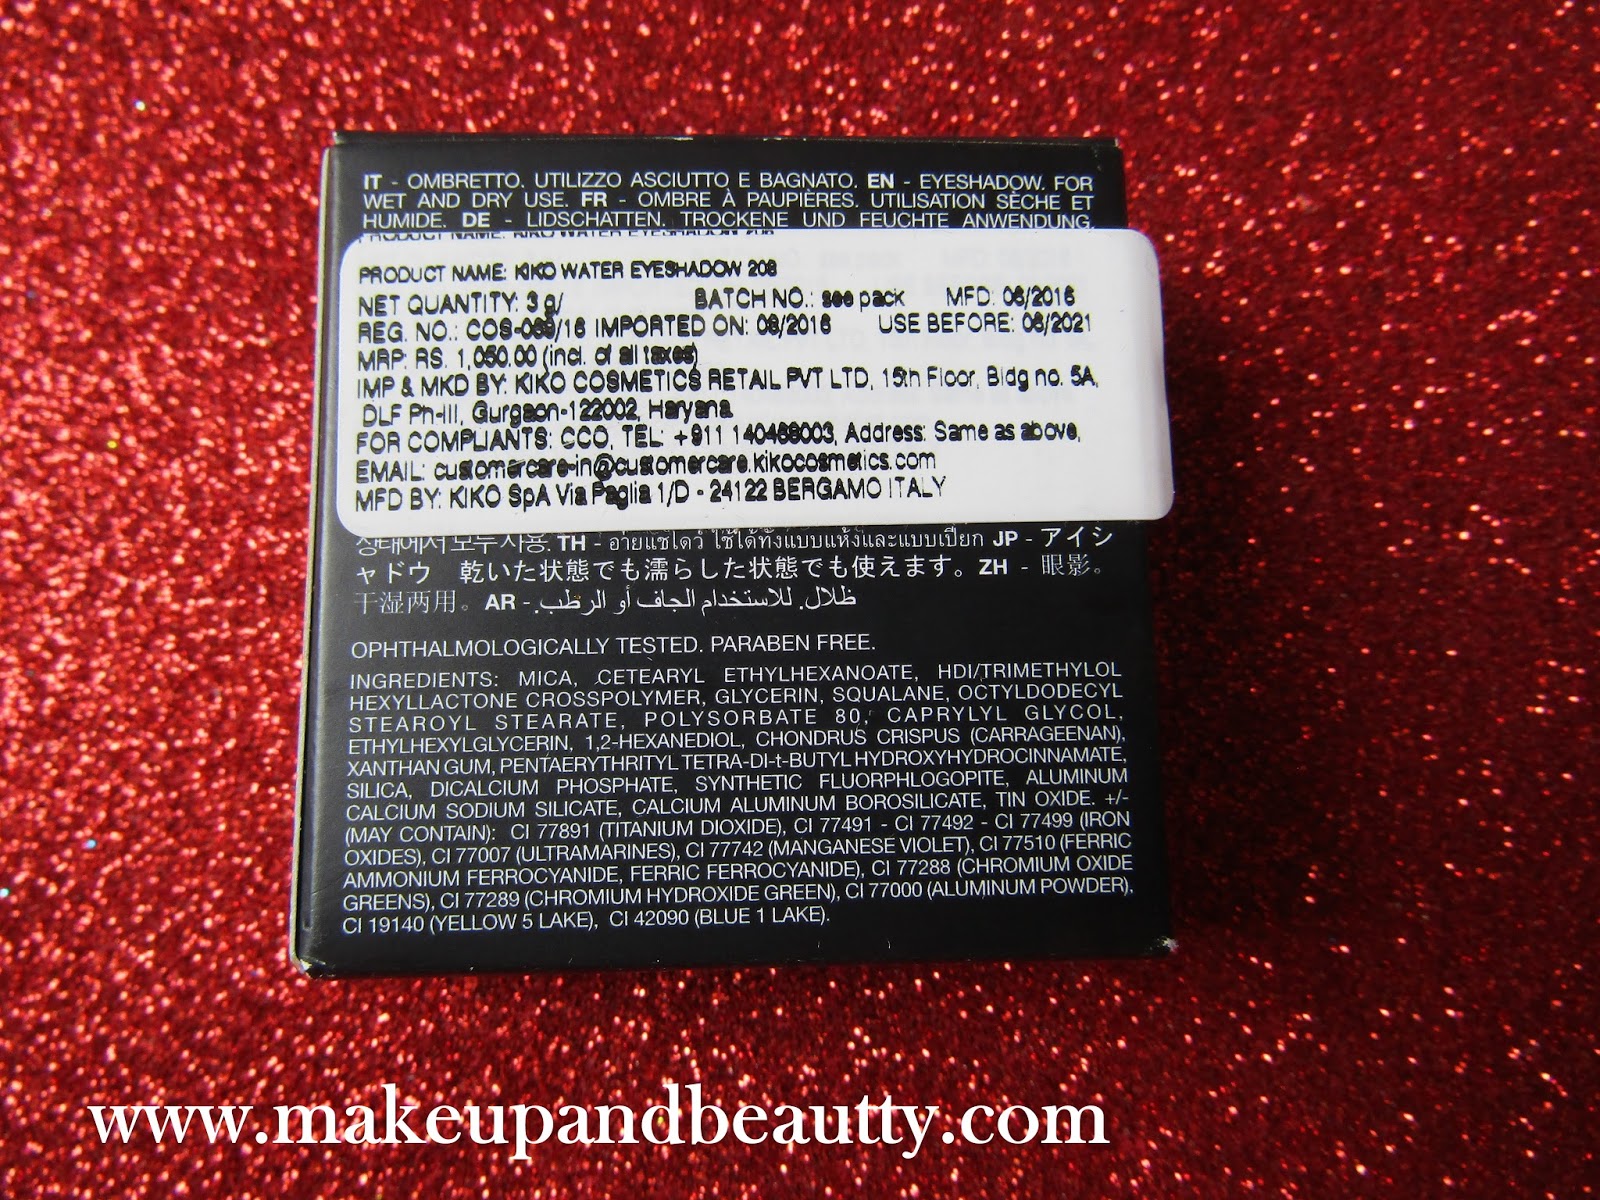 Makeup and beauty !!!: REVIEW AND SWATCHES OF KIKO MILANO WATER ...